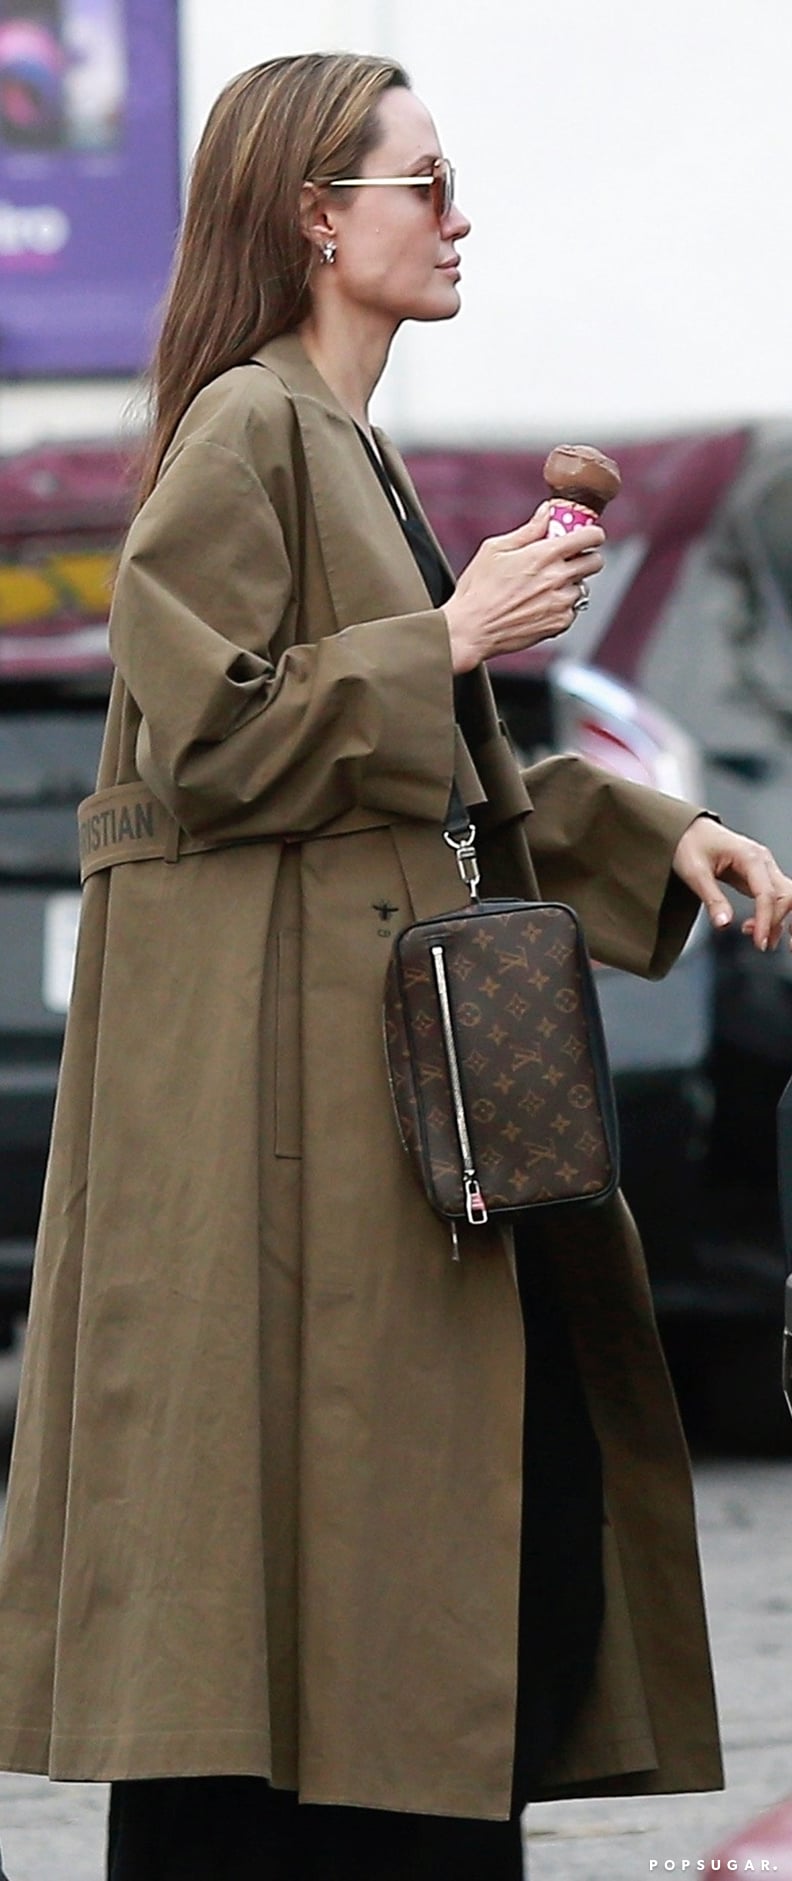 Angelina Jolie's Lady Dior Bag Is A Designer Purse Worth Buying